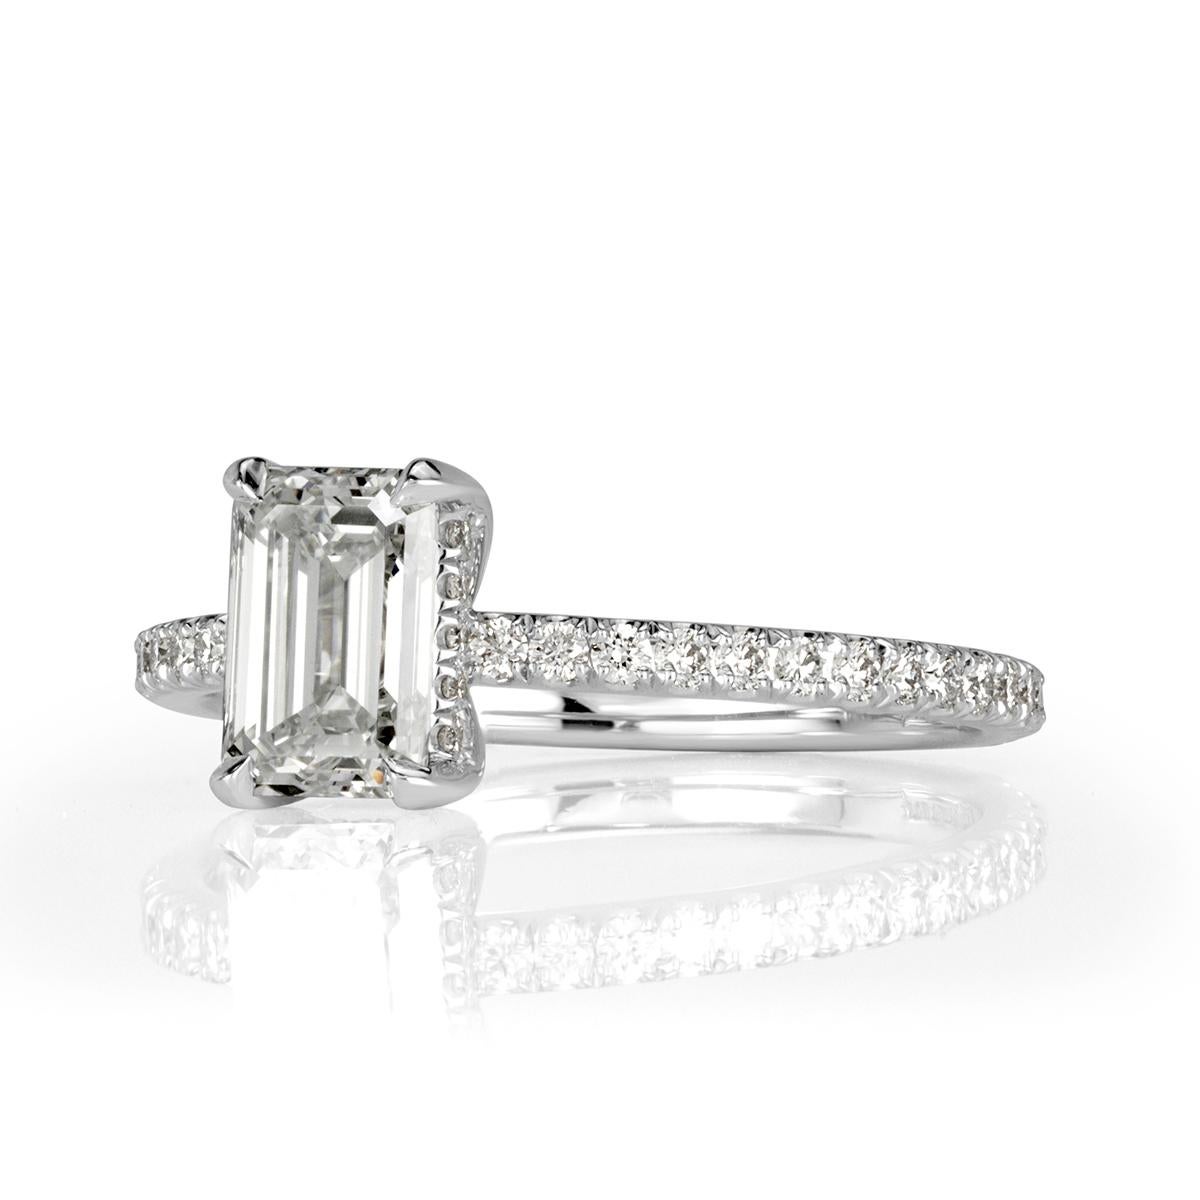 This ravishing diamond engagement ring showcases an exquisite 1.03ct emerald cut center diamond, GIA certified at F-VS1. It is poised atop a dainty micro pavé band and accented by a hidden halo of round brilliant cut diamonds studded onto the center